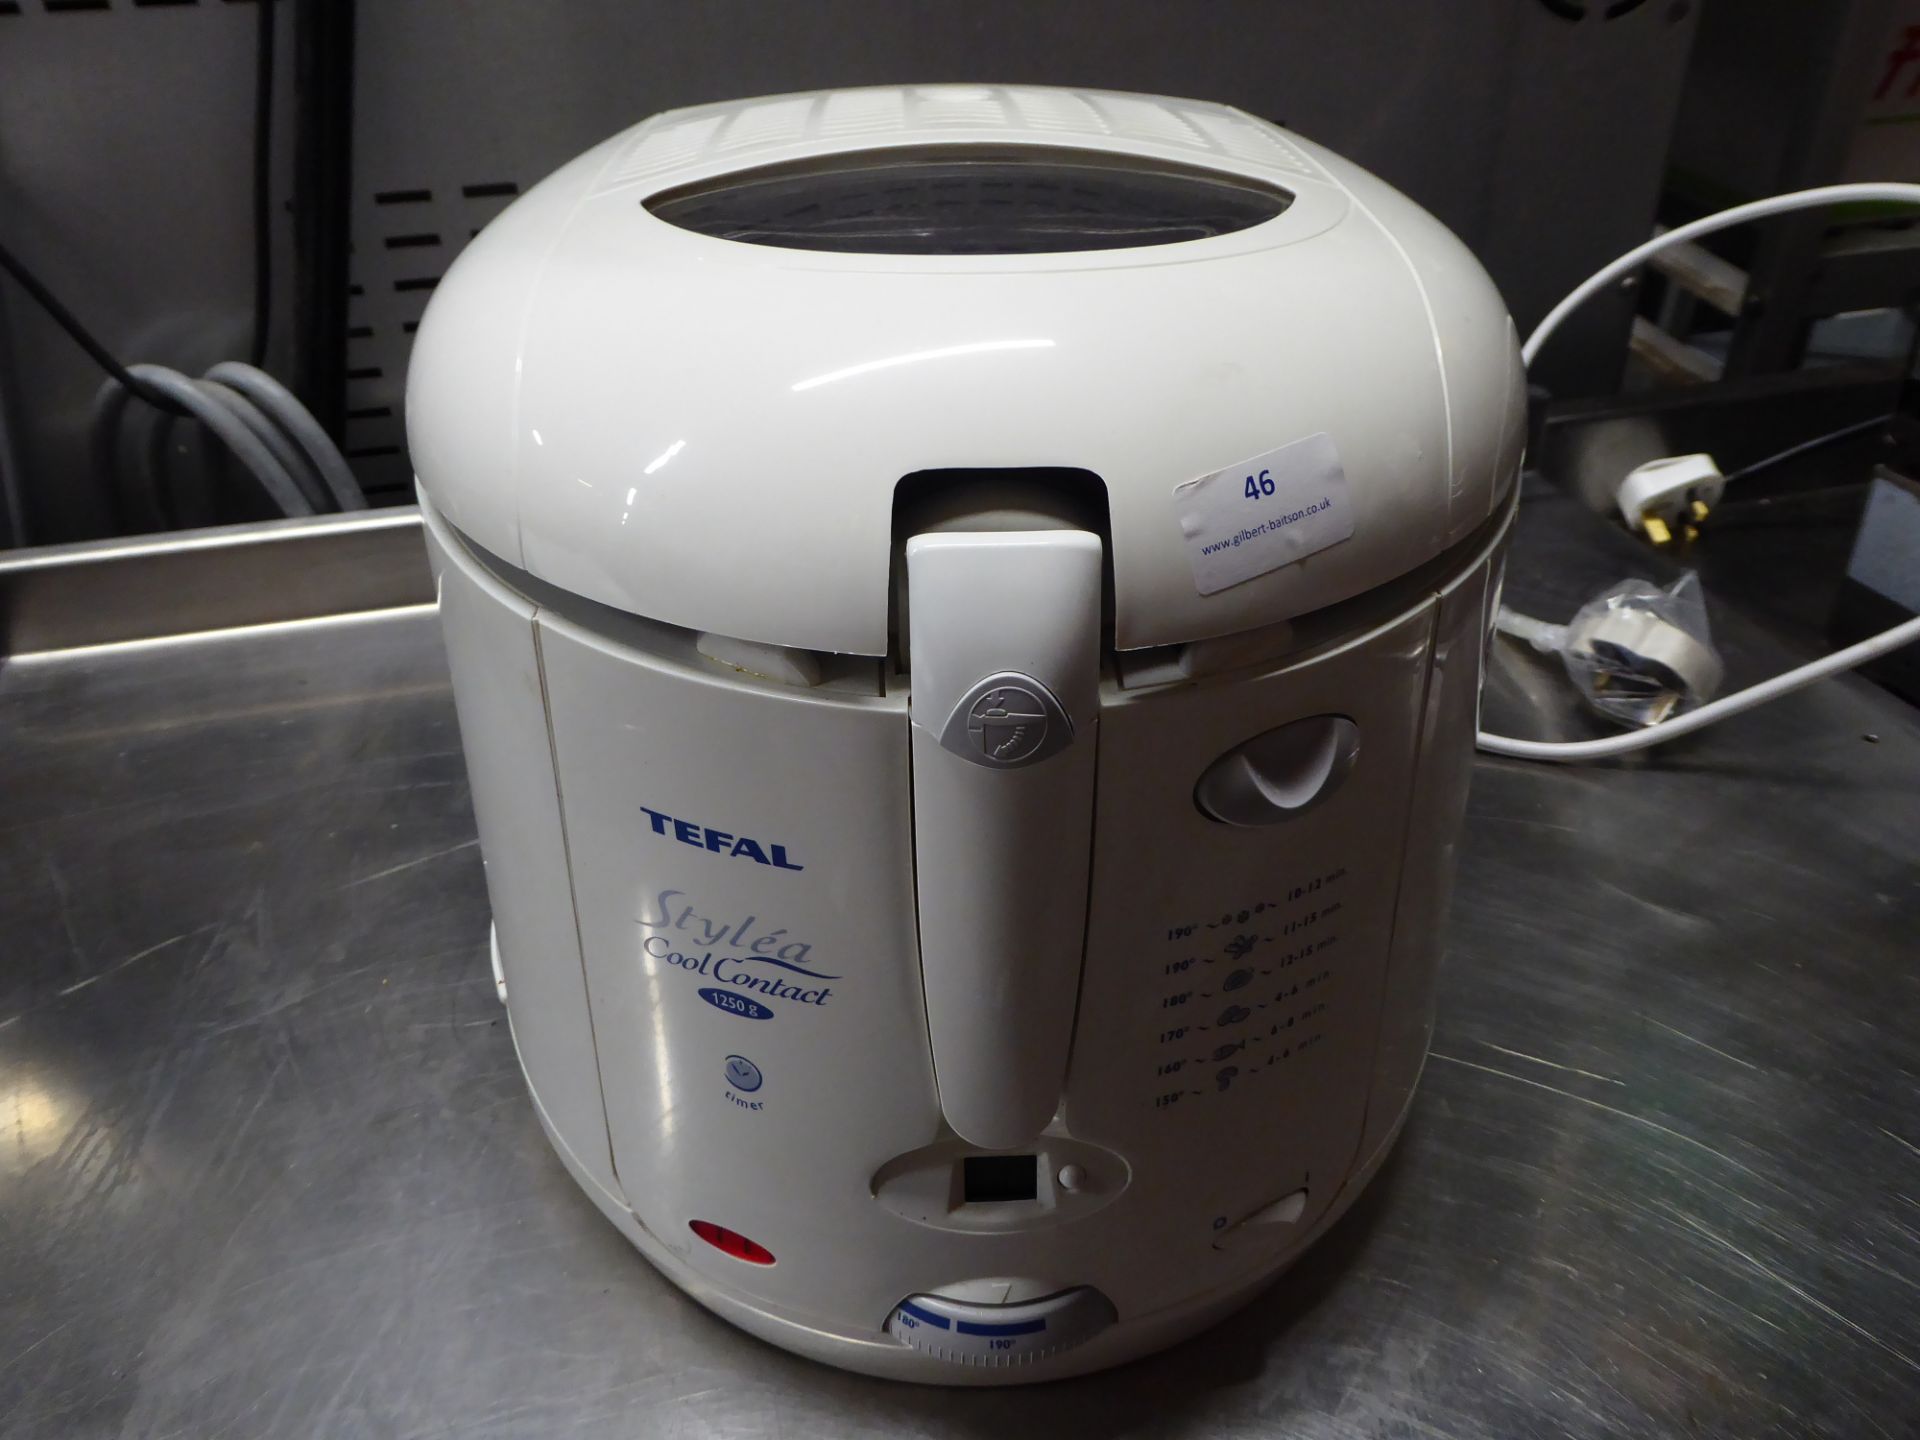 *Tefal Stylea cool contact domestic fryer with timer. In good clean condition - with instruction